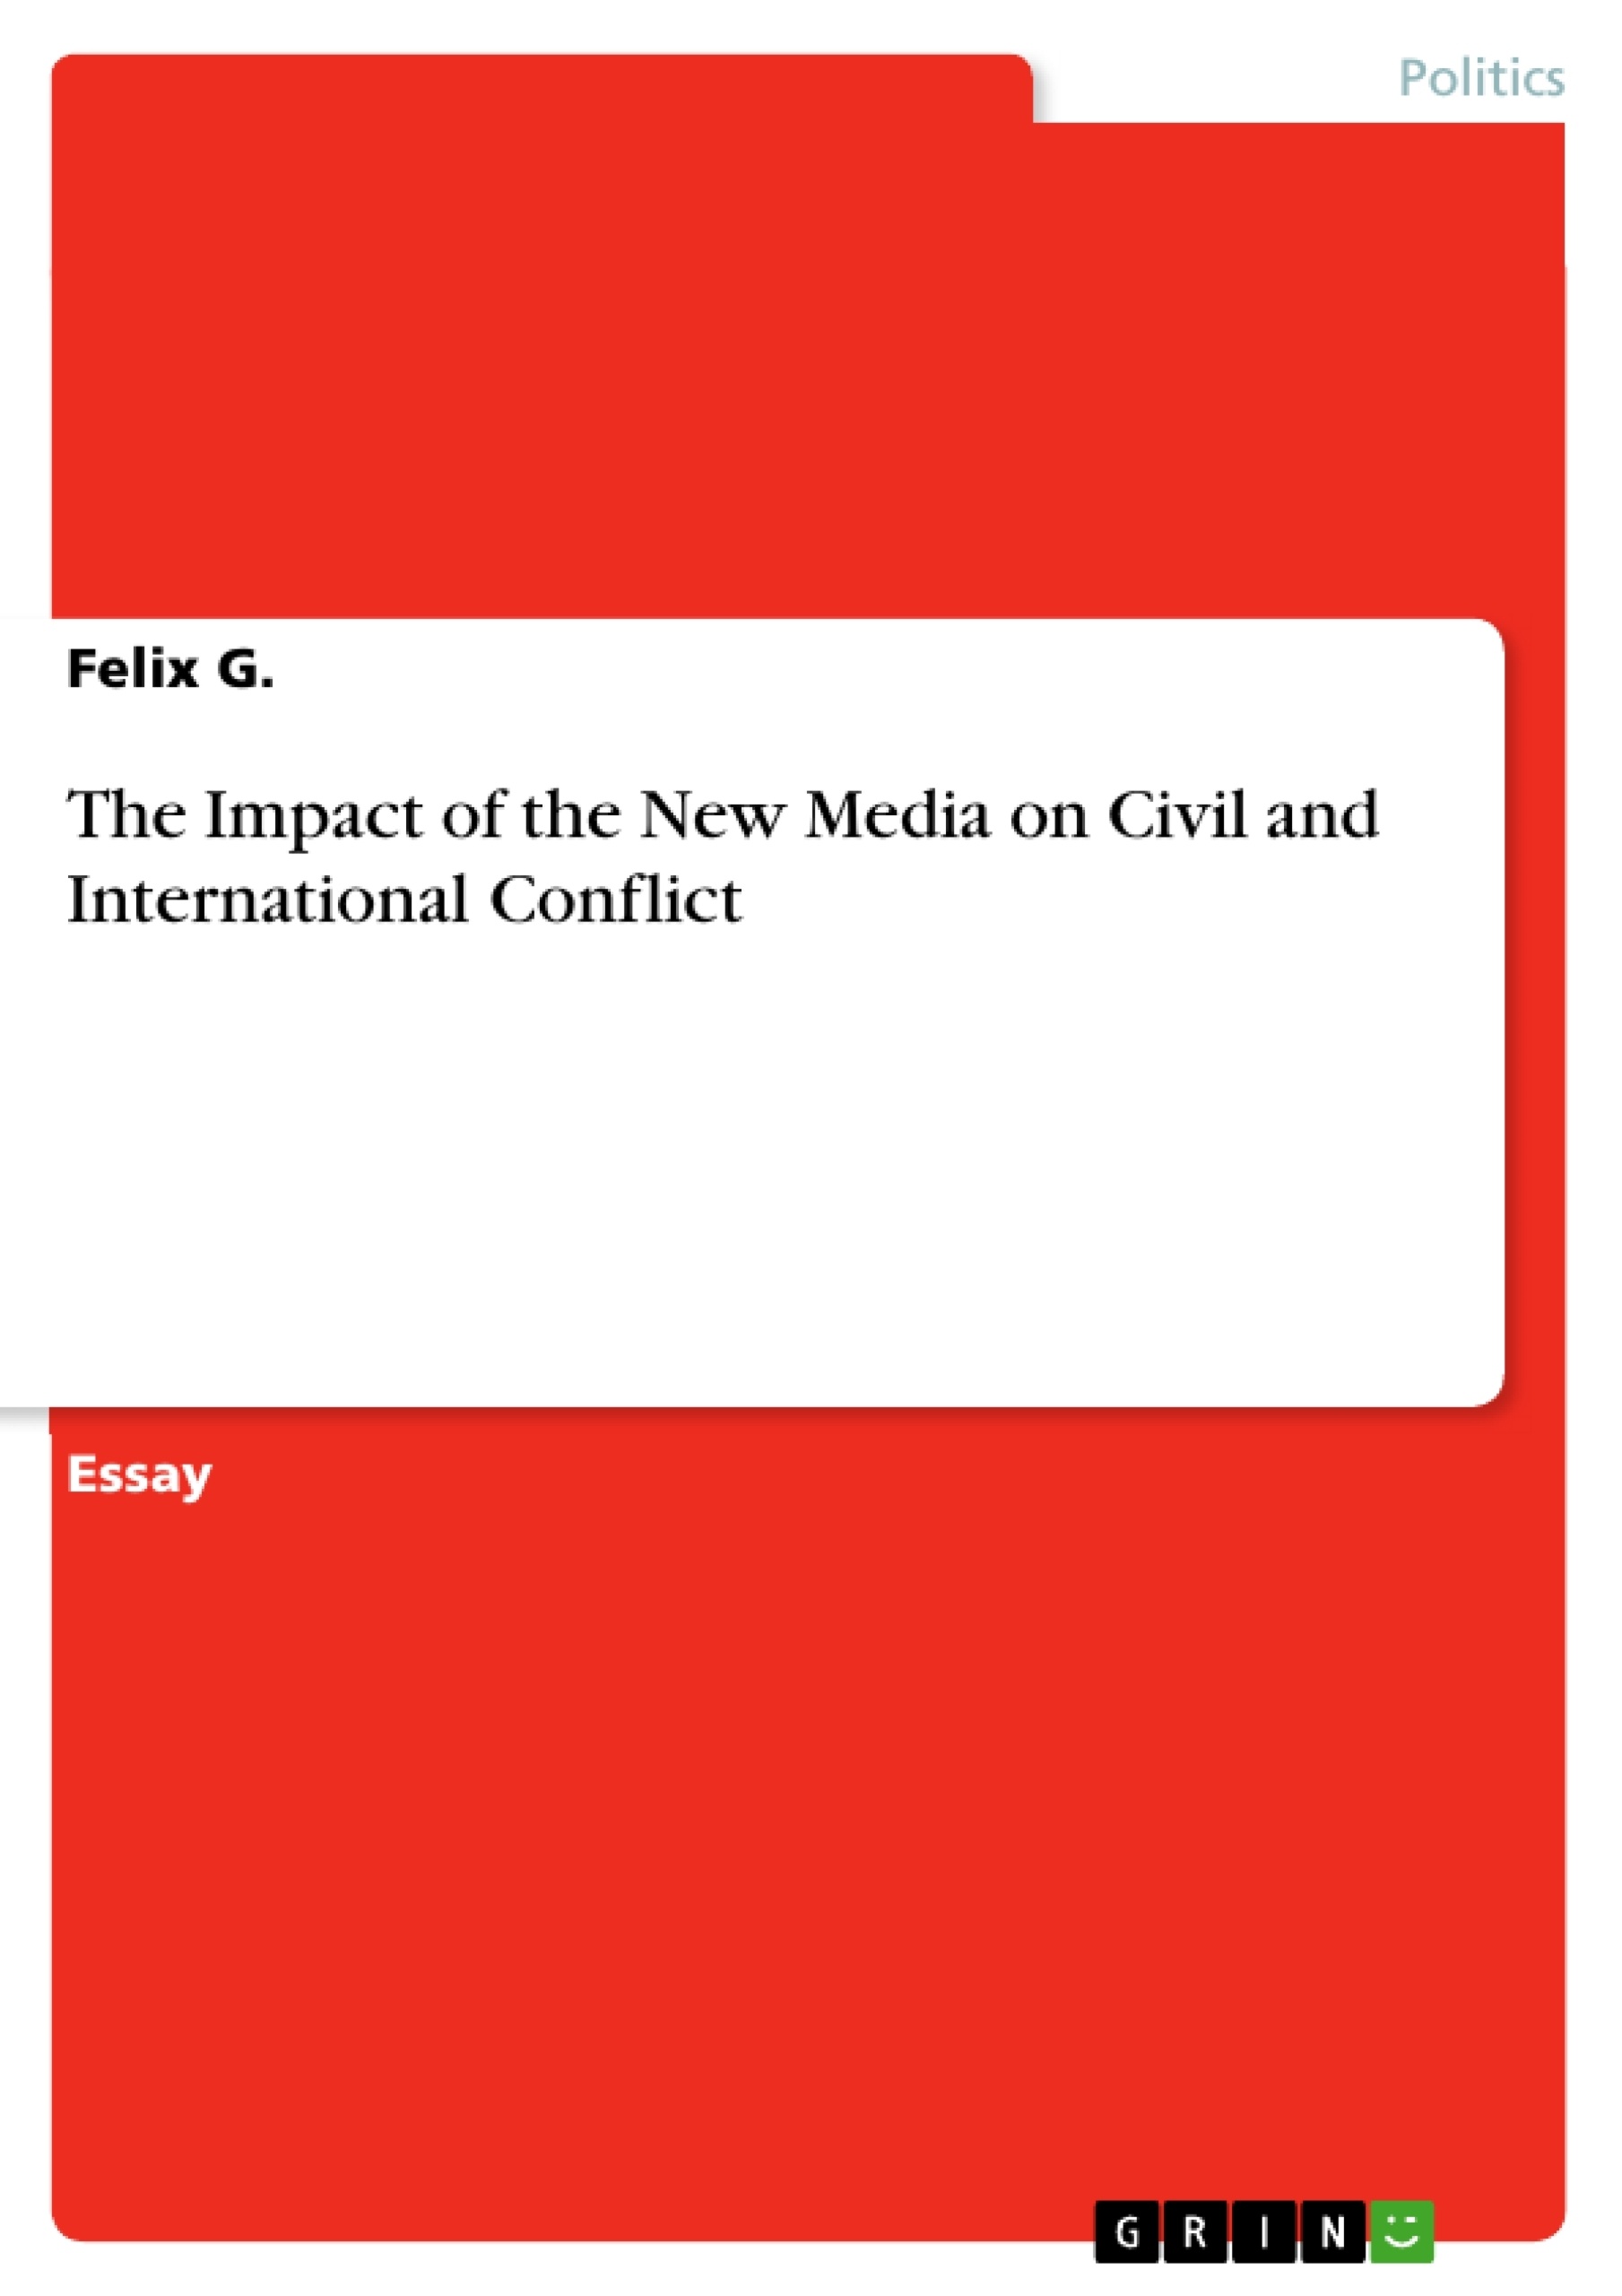 Title: The Impact of the New Media on Civil and International Conflict